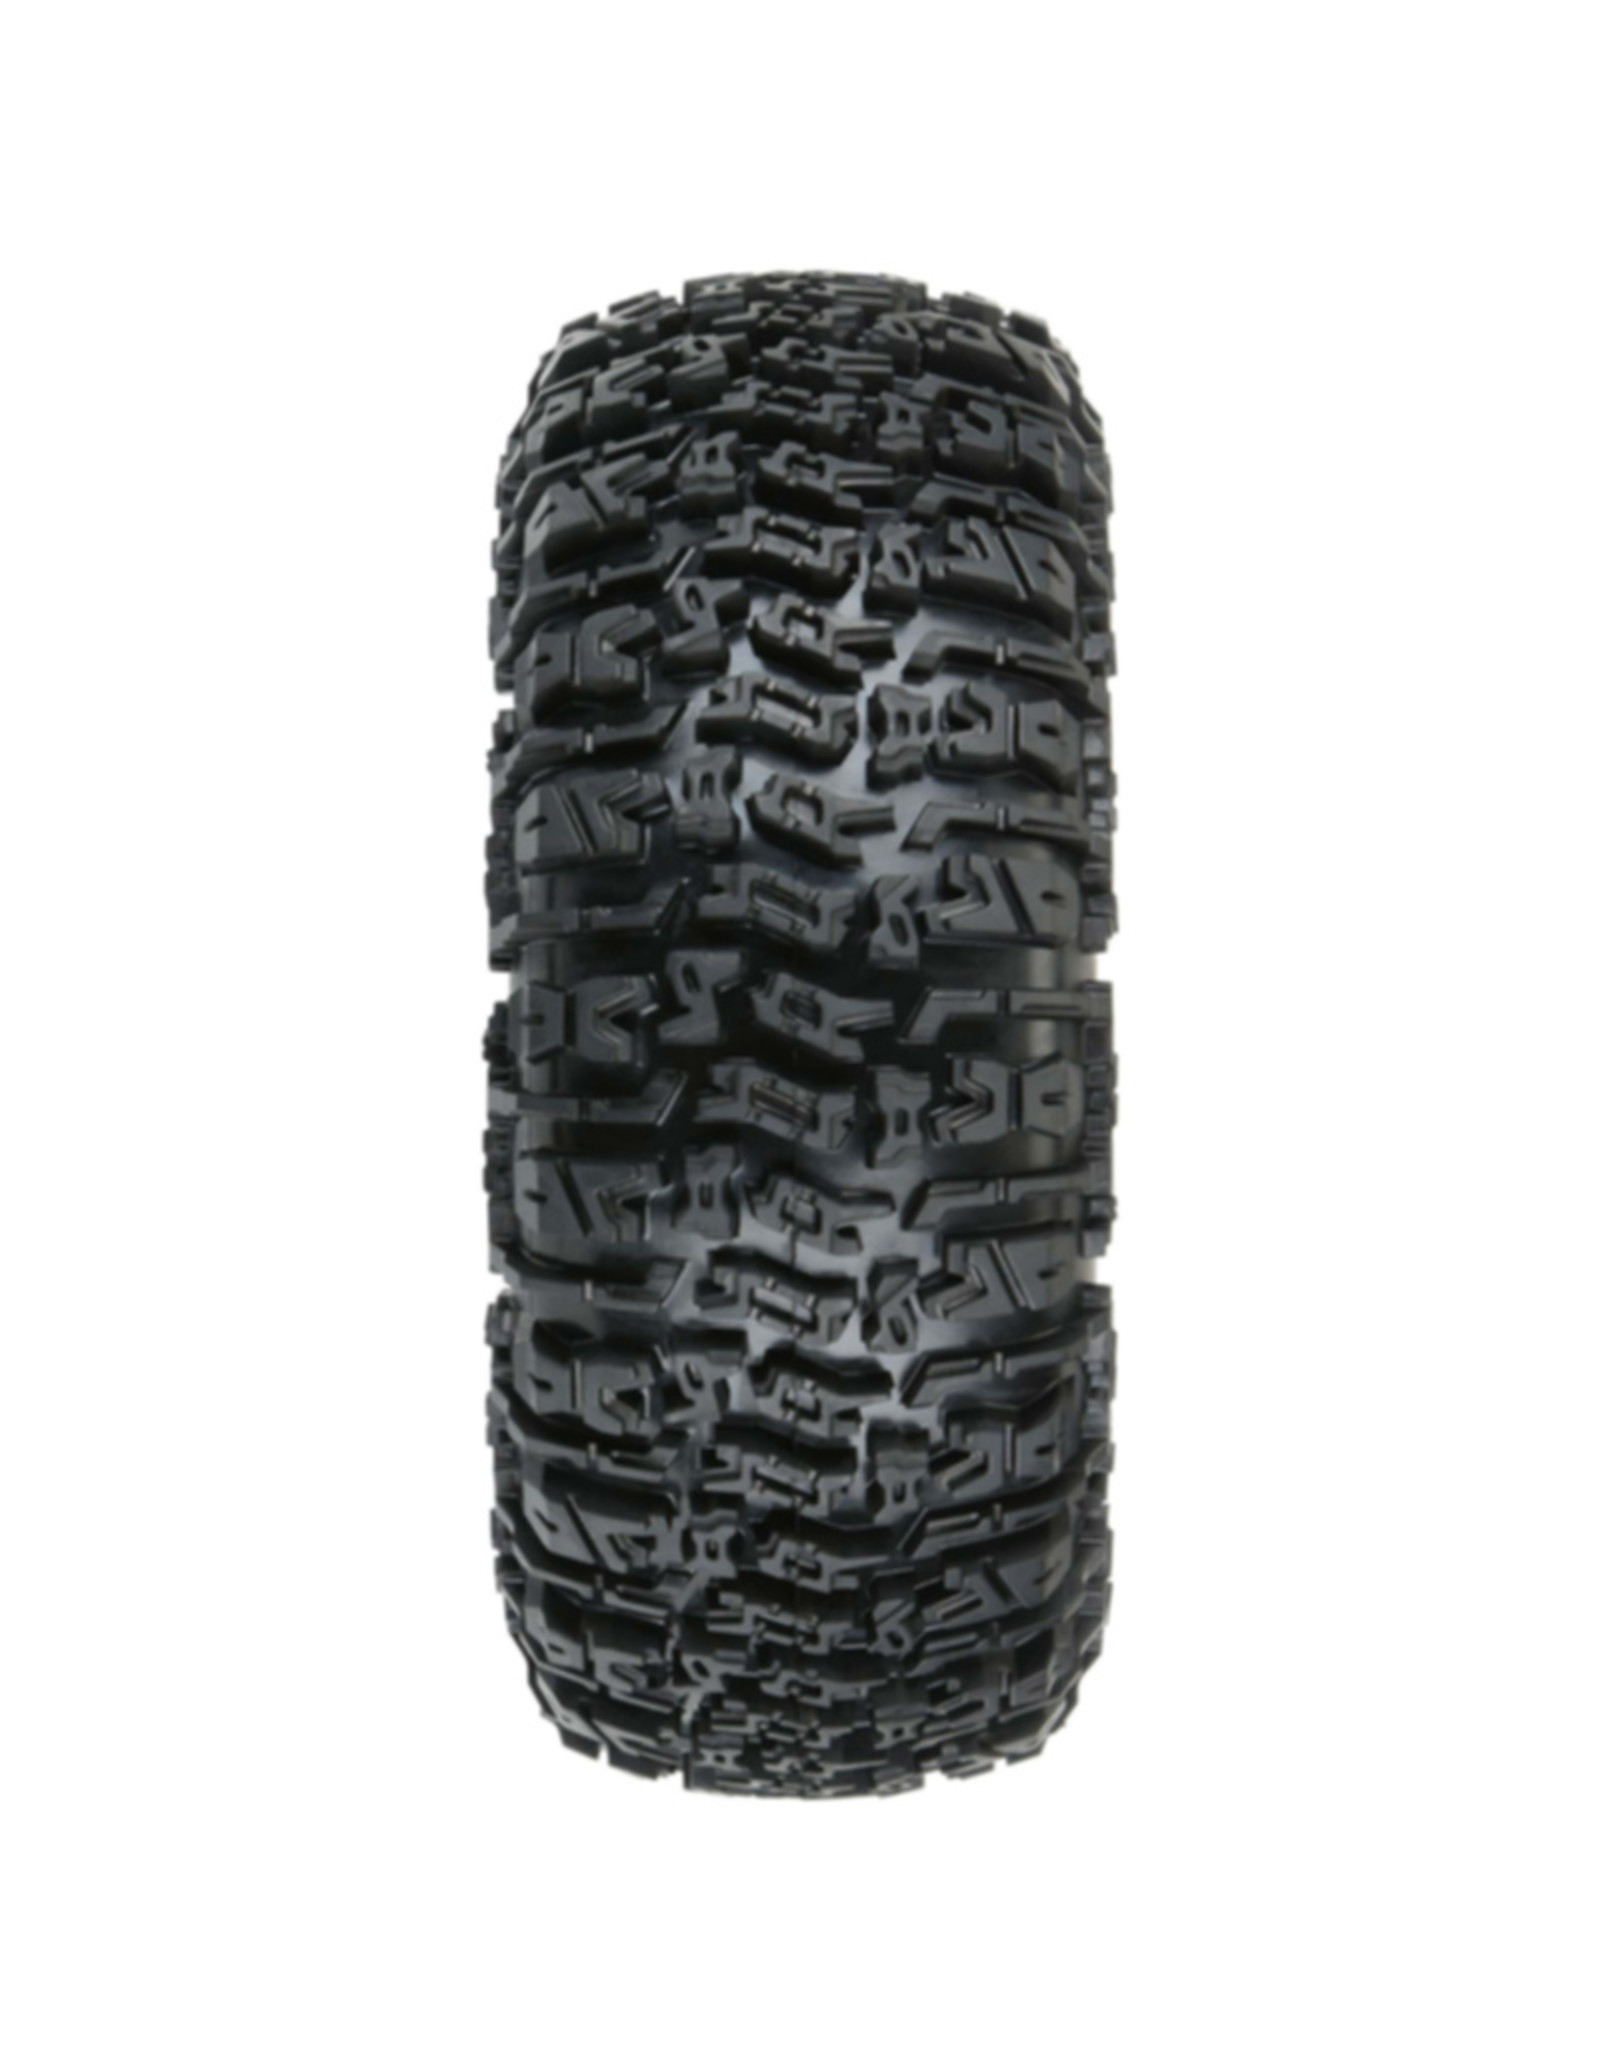 Pro-Line Racing PRO1019114 1/10 Trencher G8 Front/Rear 2.2" Rock Crawling Tires (2)